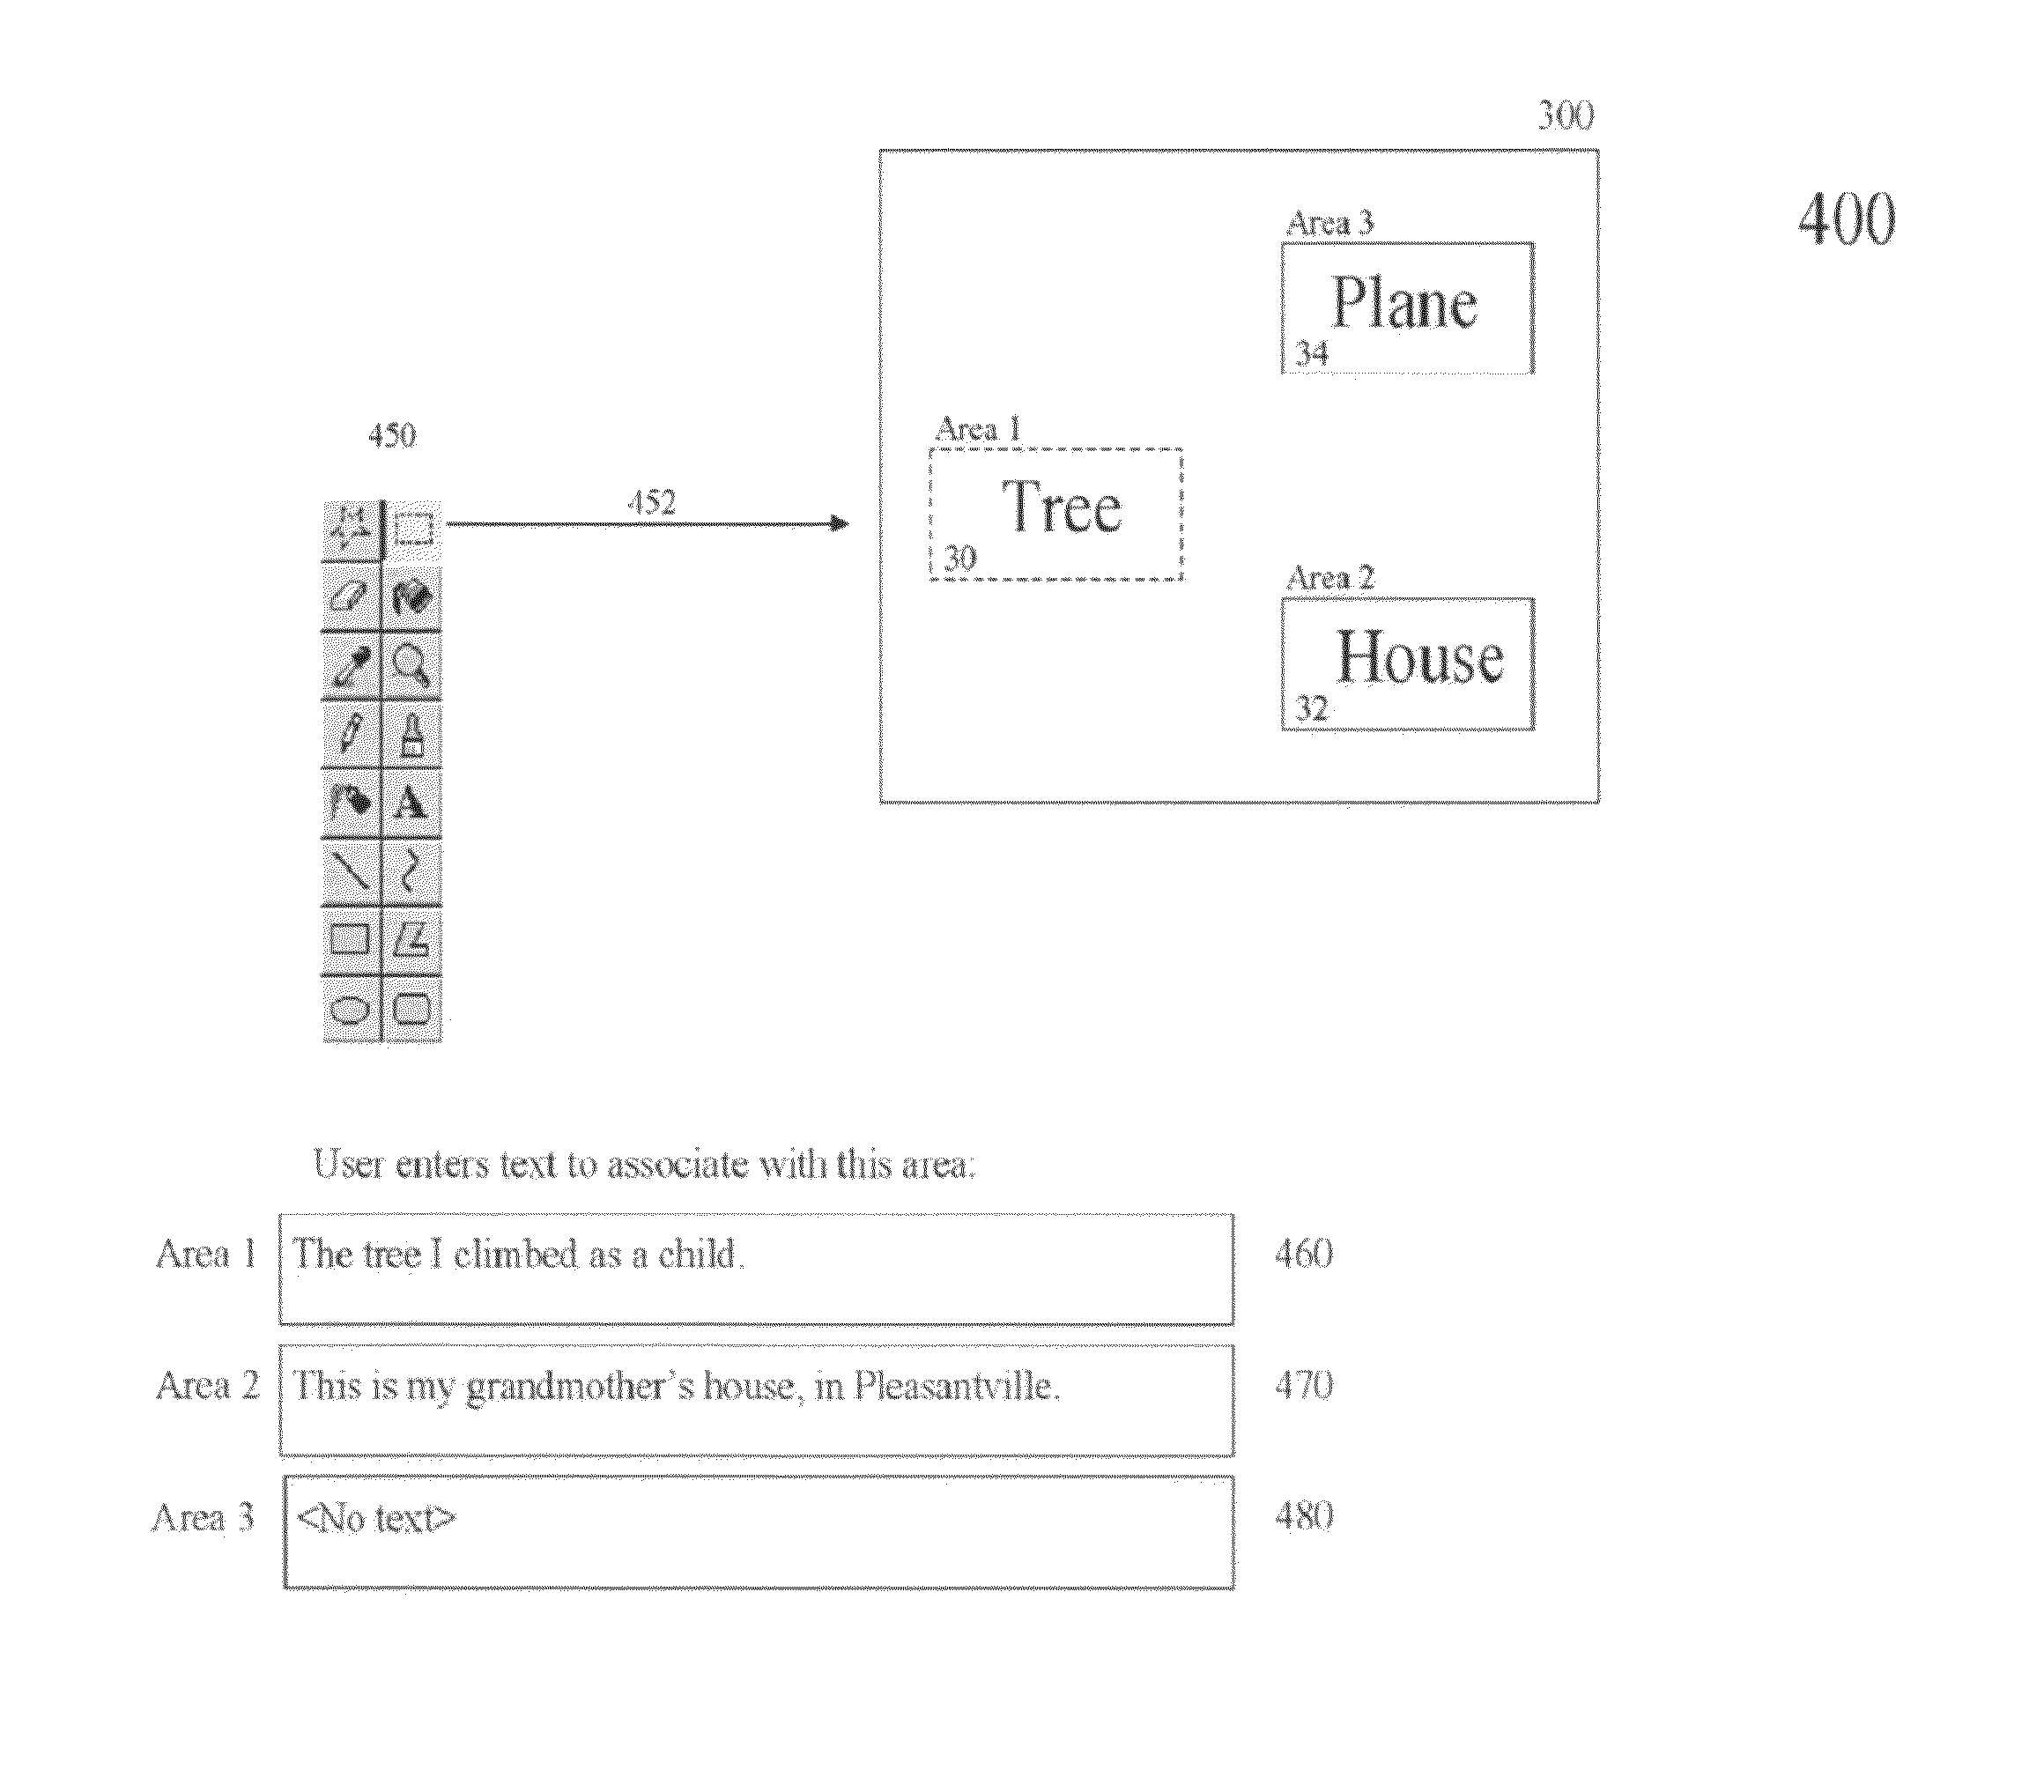 System and method for providing viewers of a digital image information about identifiable objects and scenes within the image